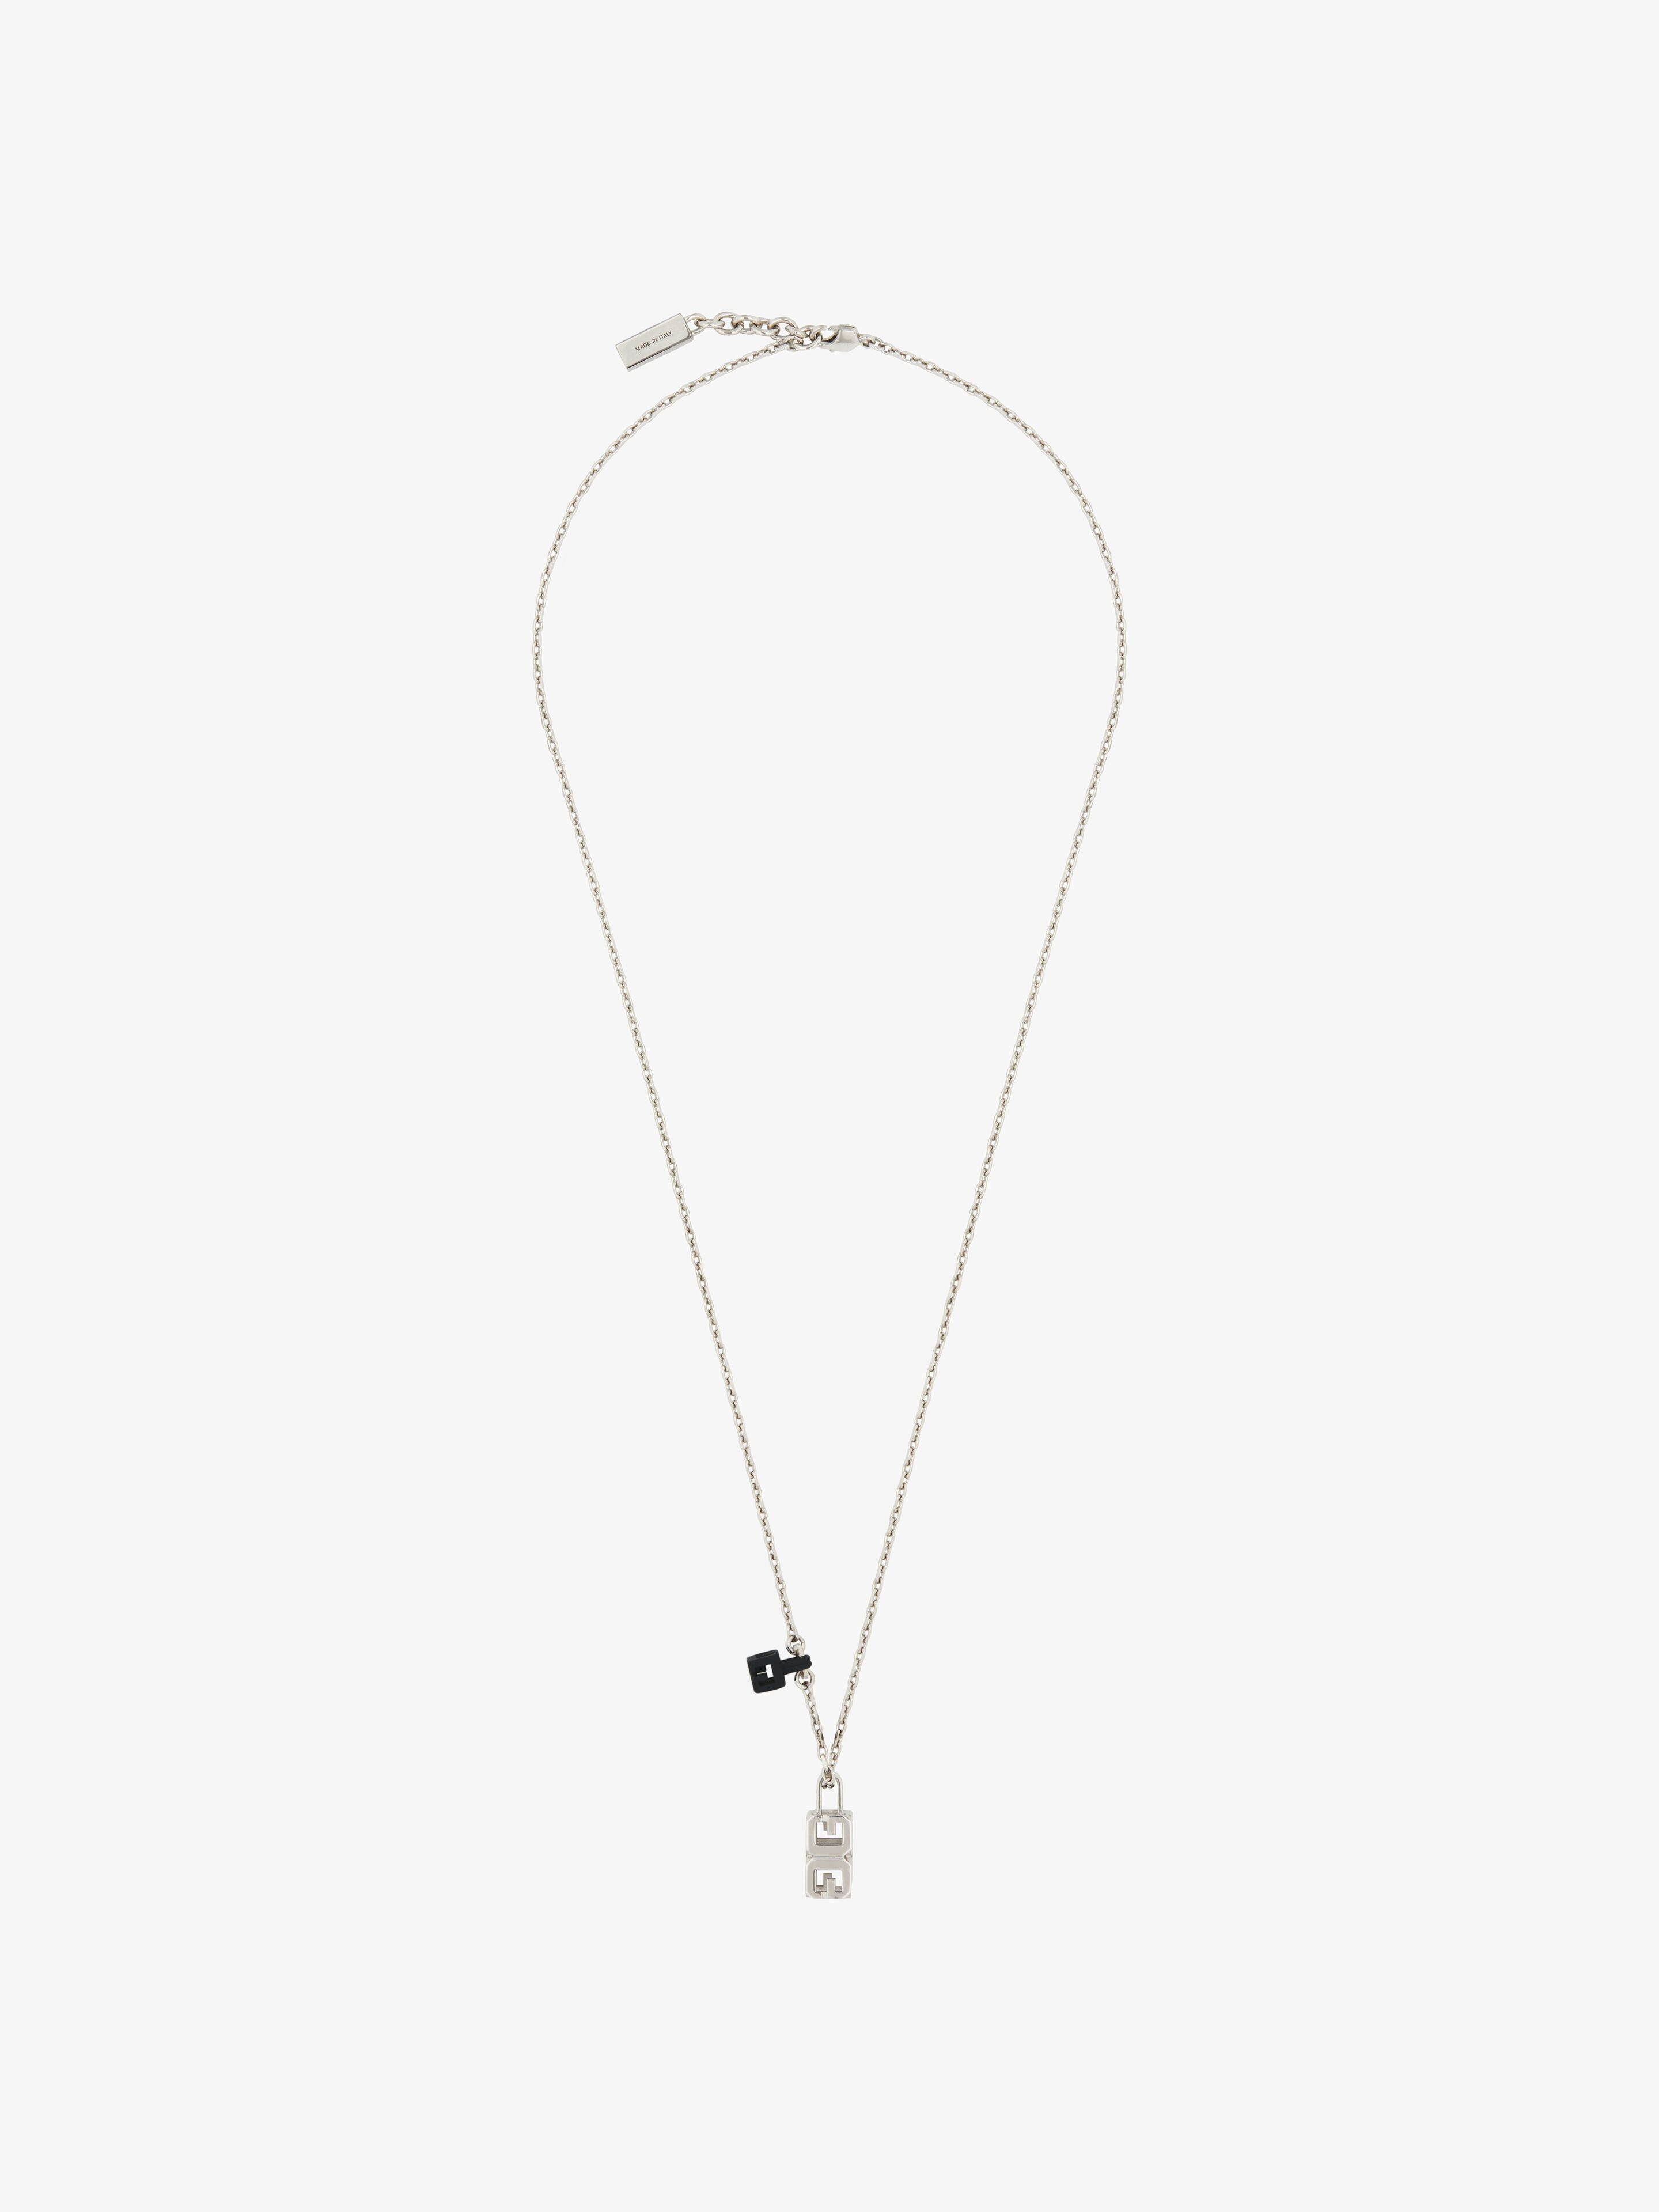 G CUBE PENDANT NECKLACE IN METAL - 5